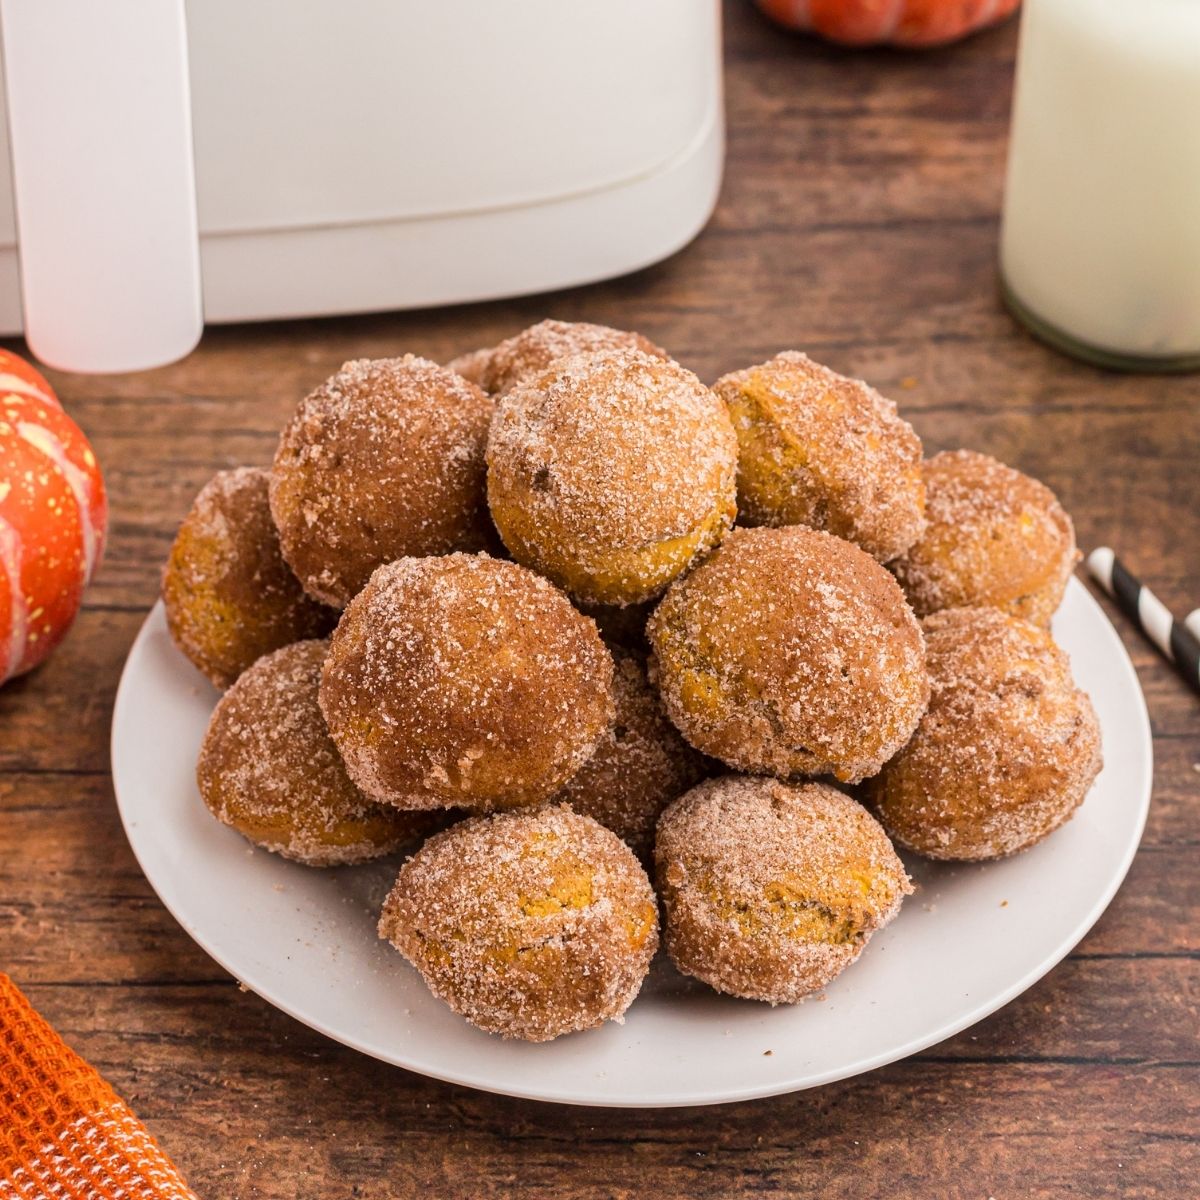 Golden pumpkin donut holes stacked on a white plate in front of glasses of milk and air fryer on a wooden table.